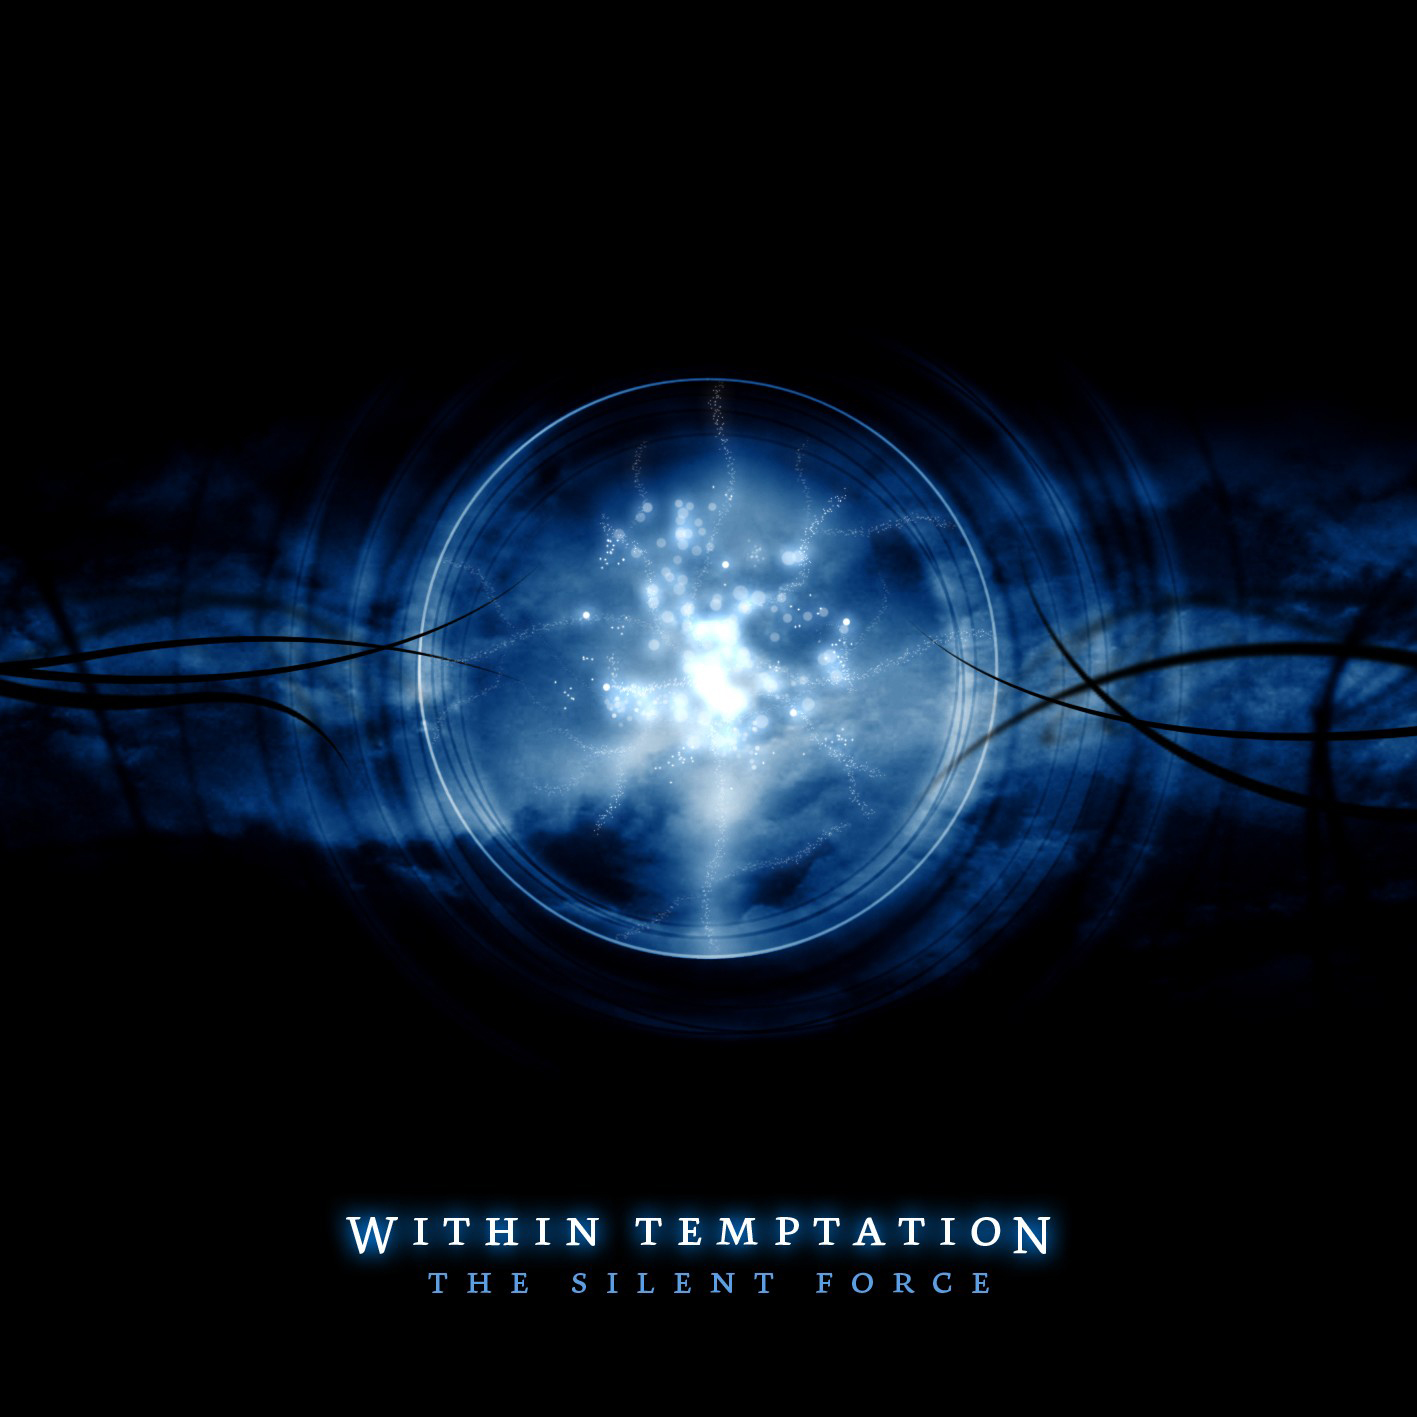 Vol 1, Track 11: ”The Silent Force” by Within Temptation